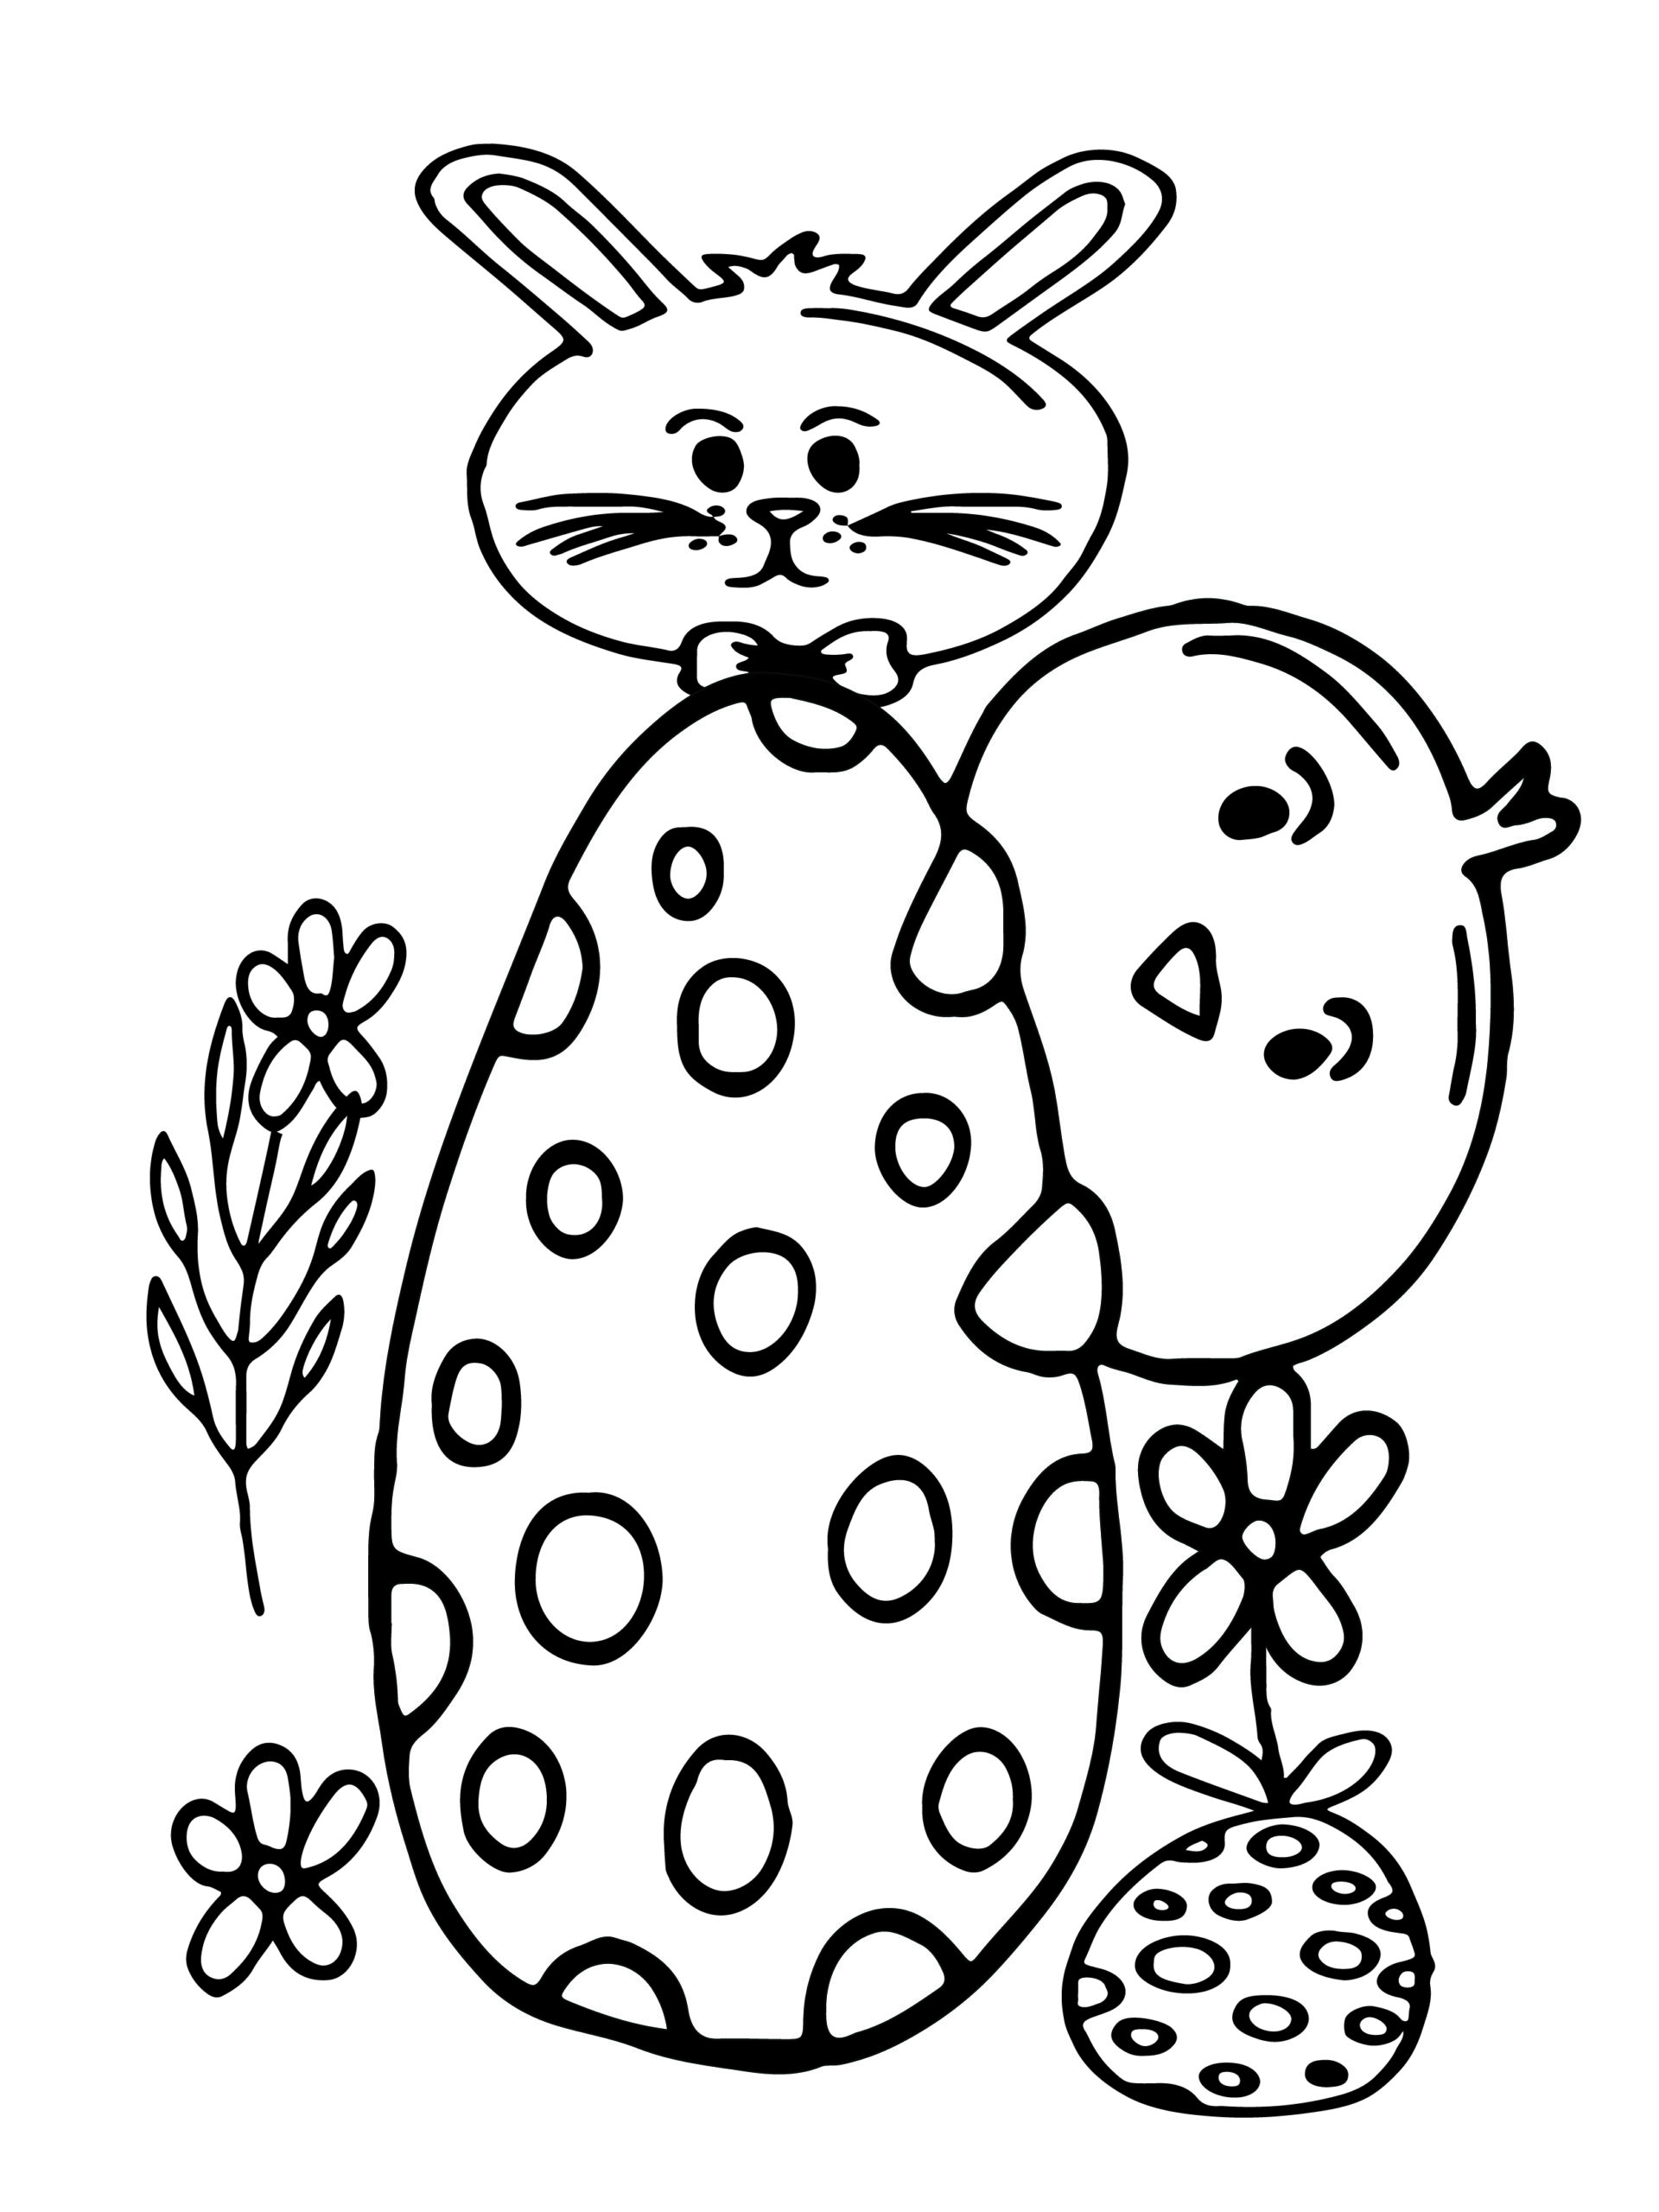 joyous Easter Coloring Page - Free Printable Coloring Pages for Kids